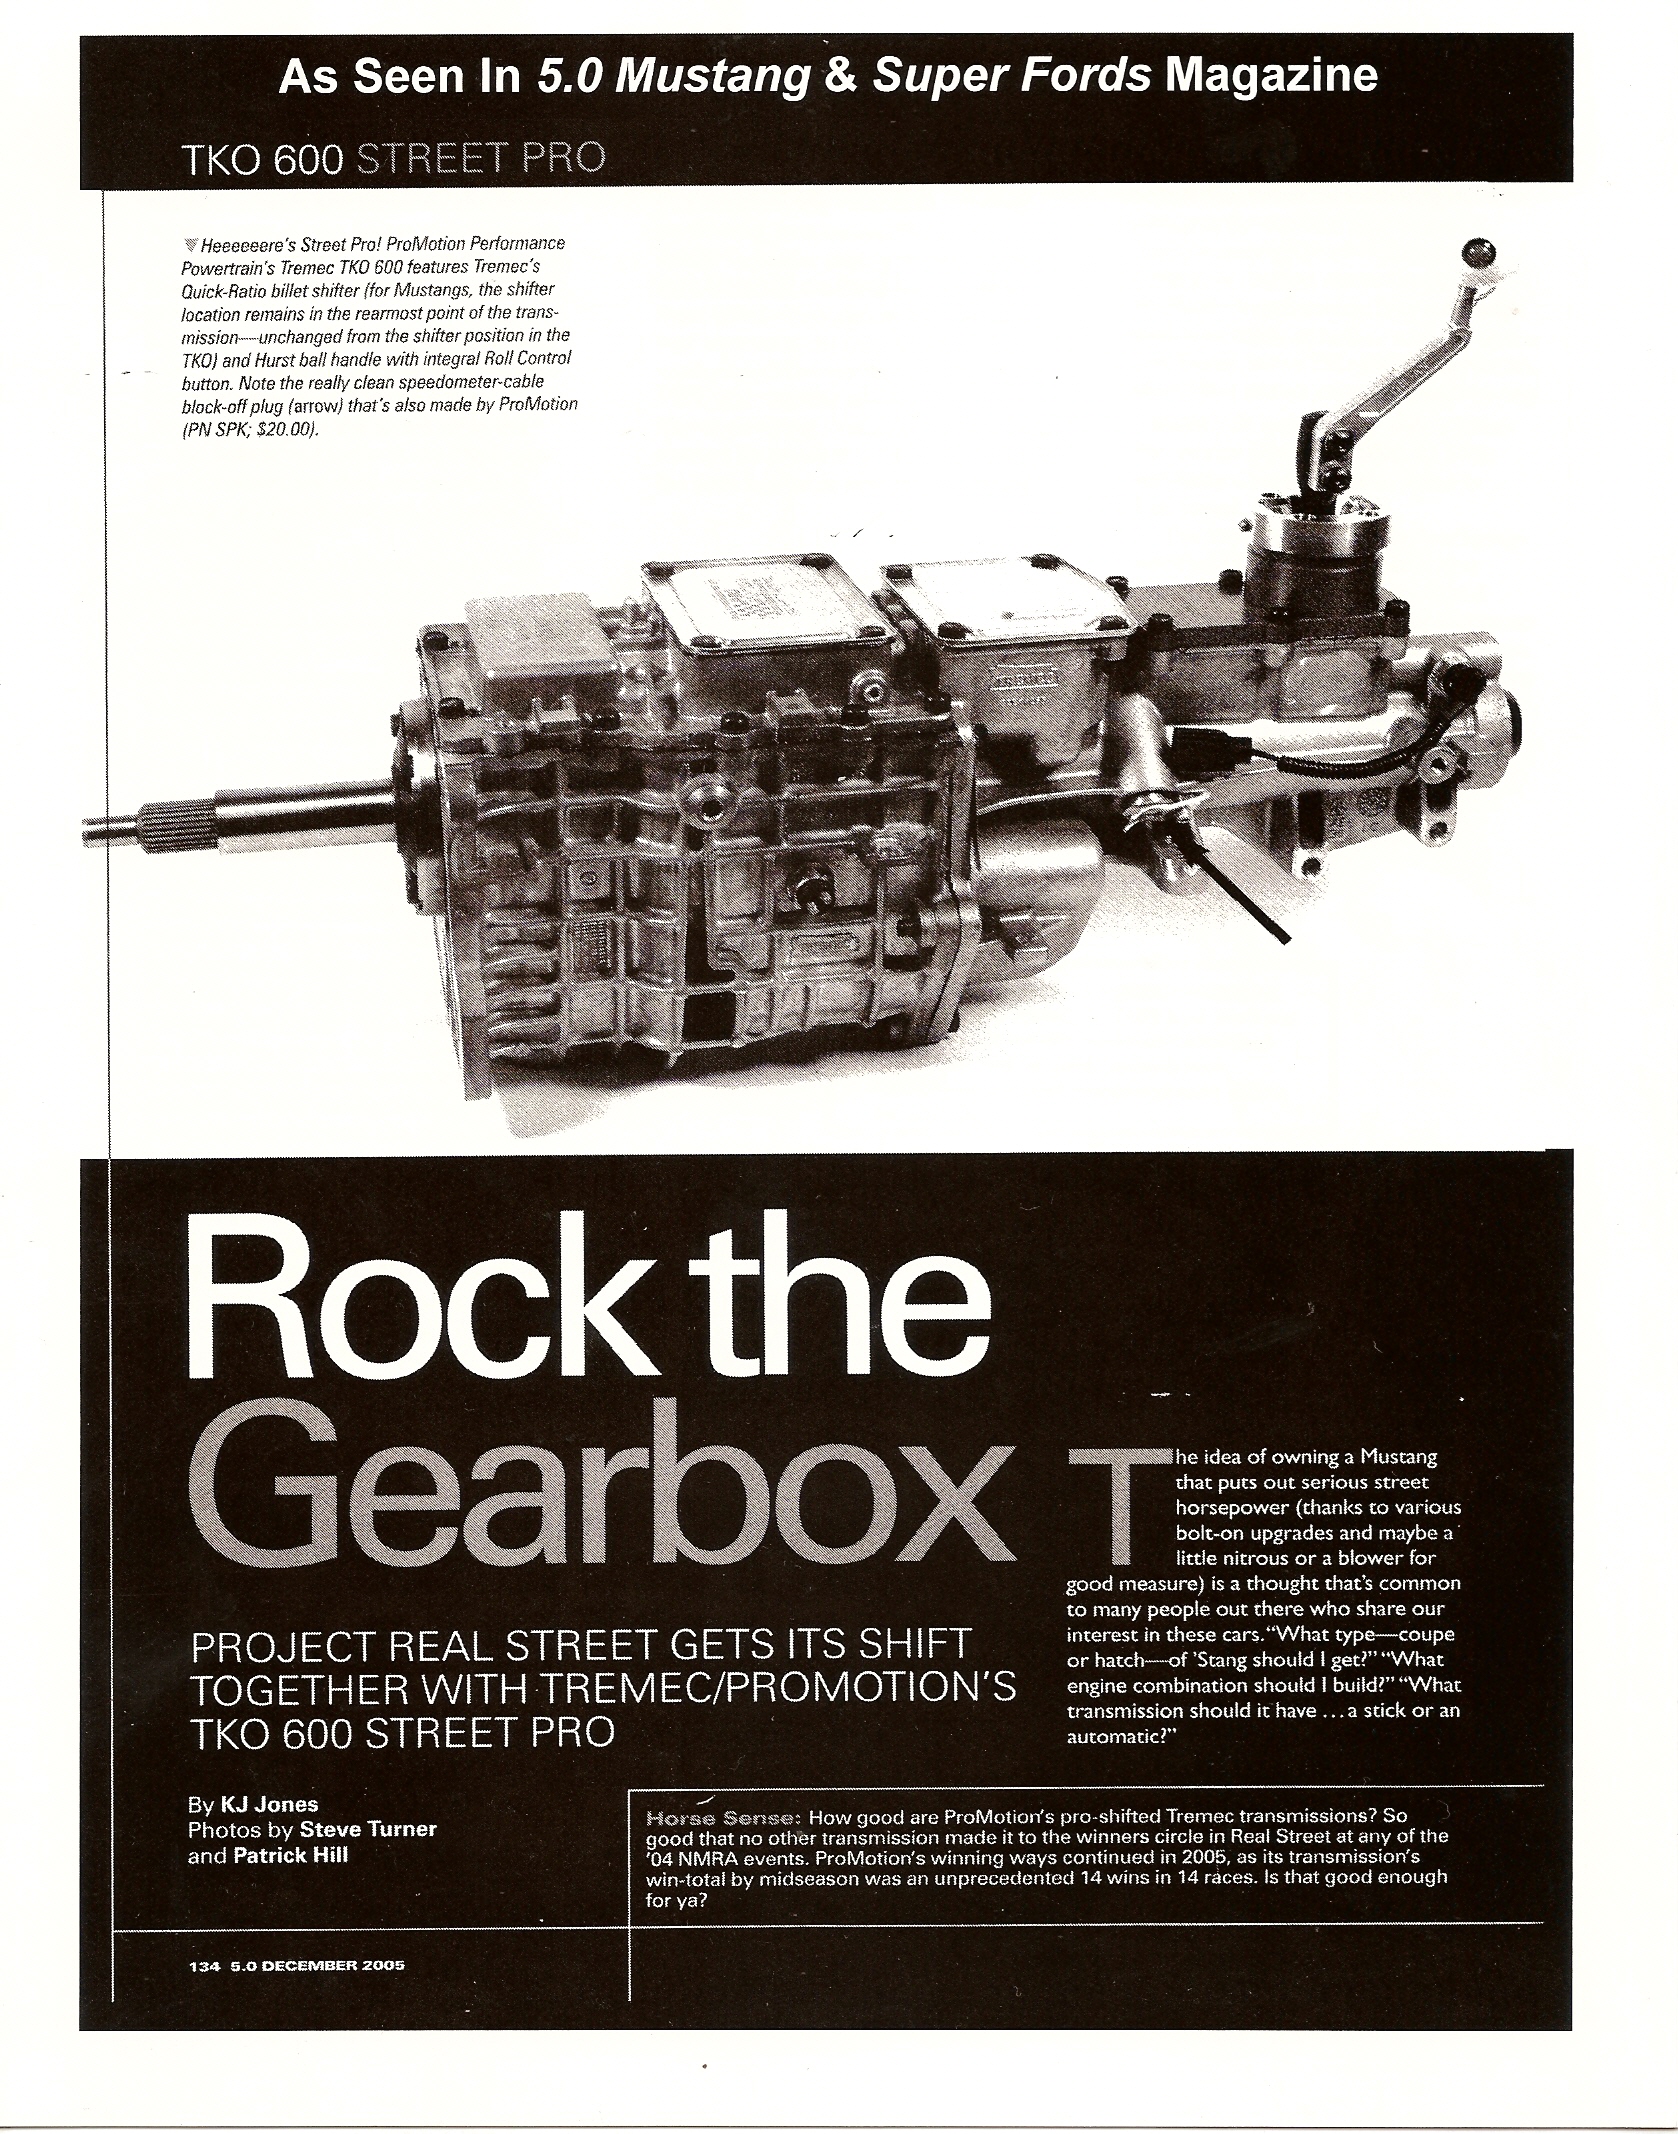 Rock the Gearbox